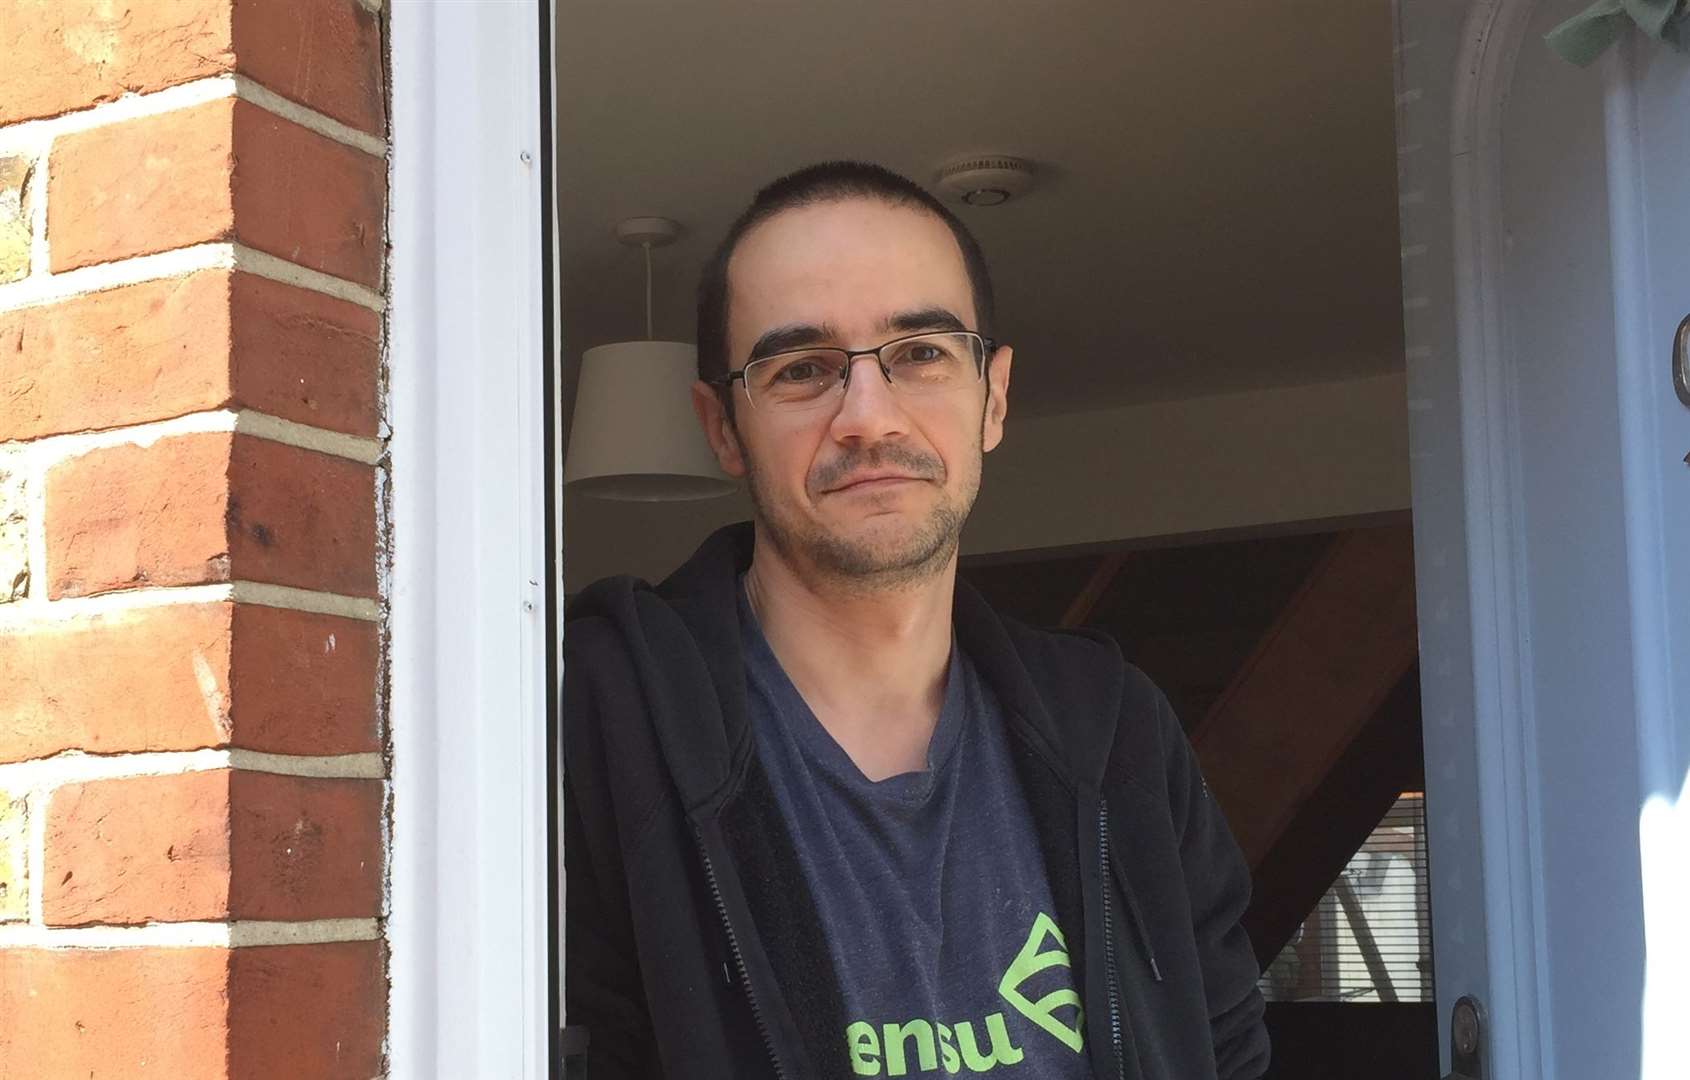 Alexandru Enachioaie, 36, has lived in Albert Street, Whitstable, for more than two years